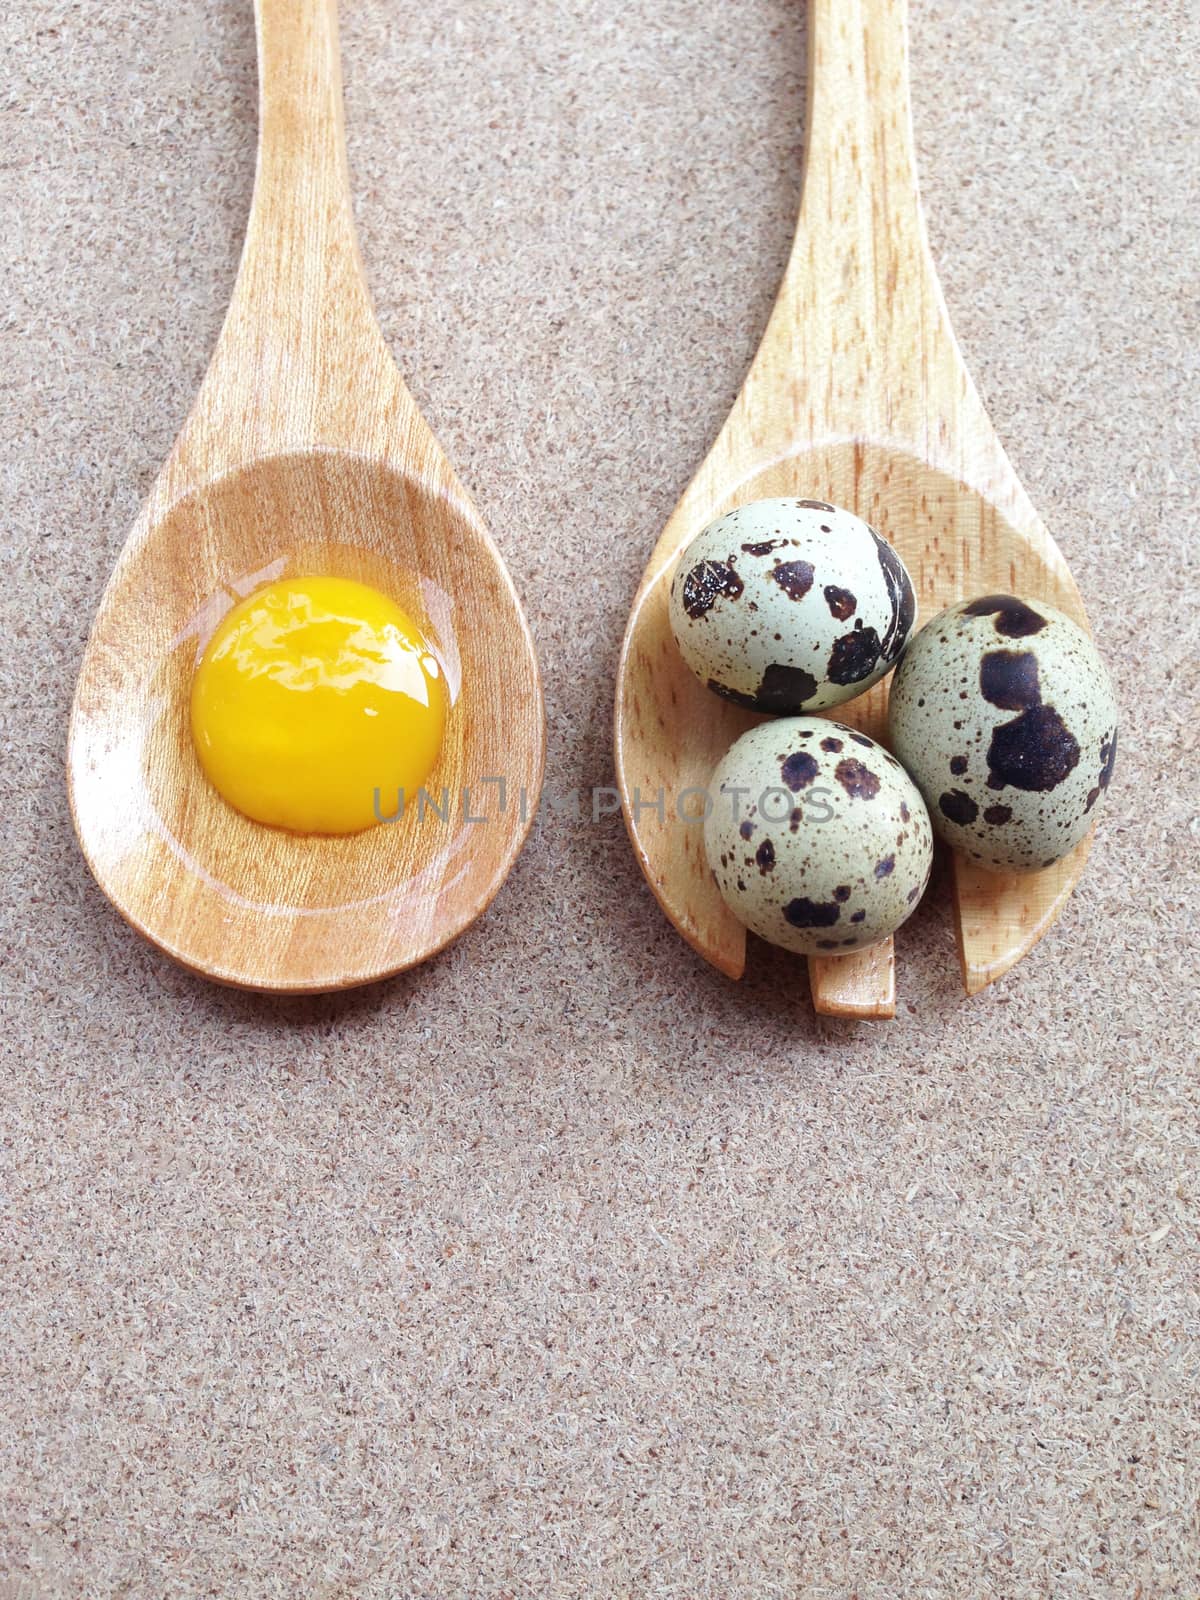 Quail eggs on wooden fork and egg yolk on wooden spoon on plywood background